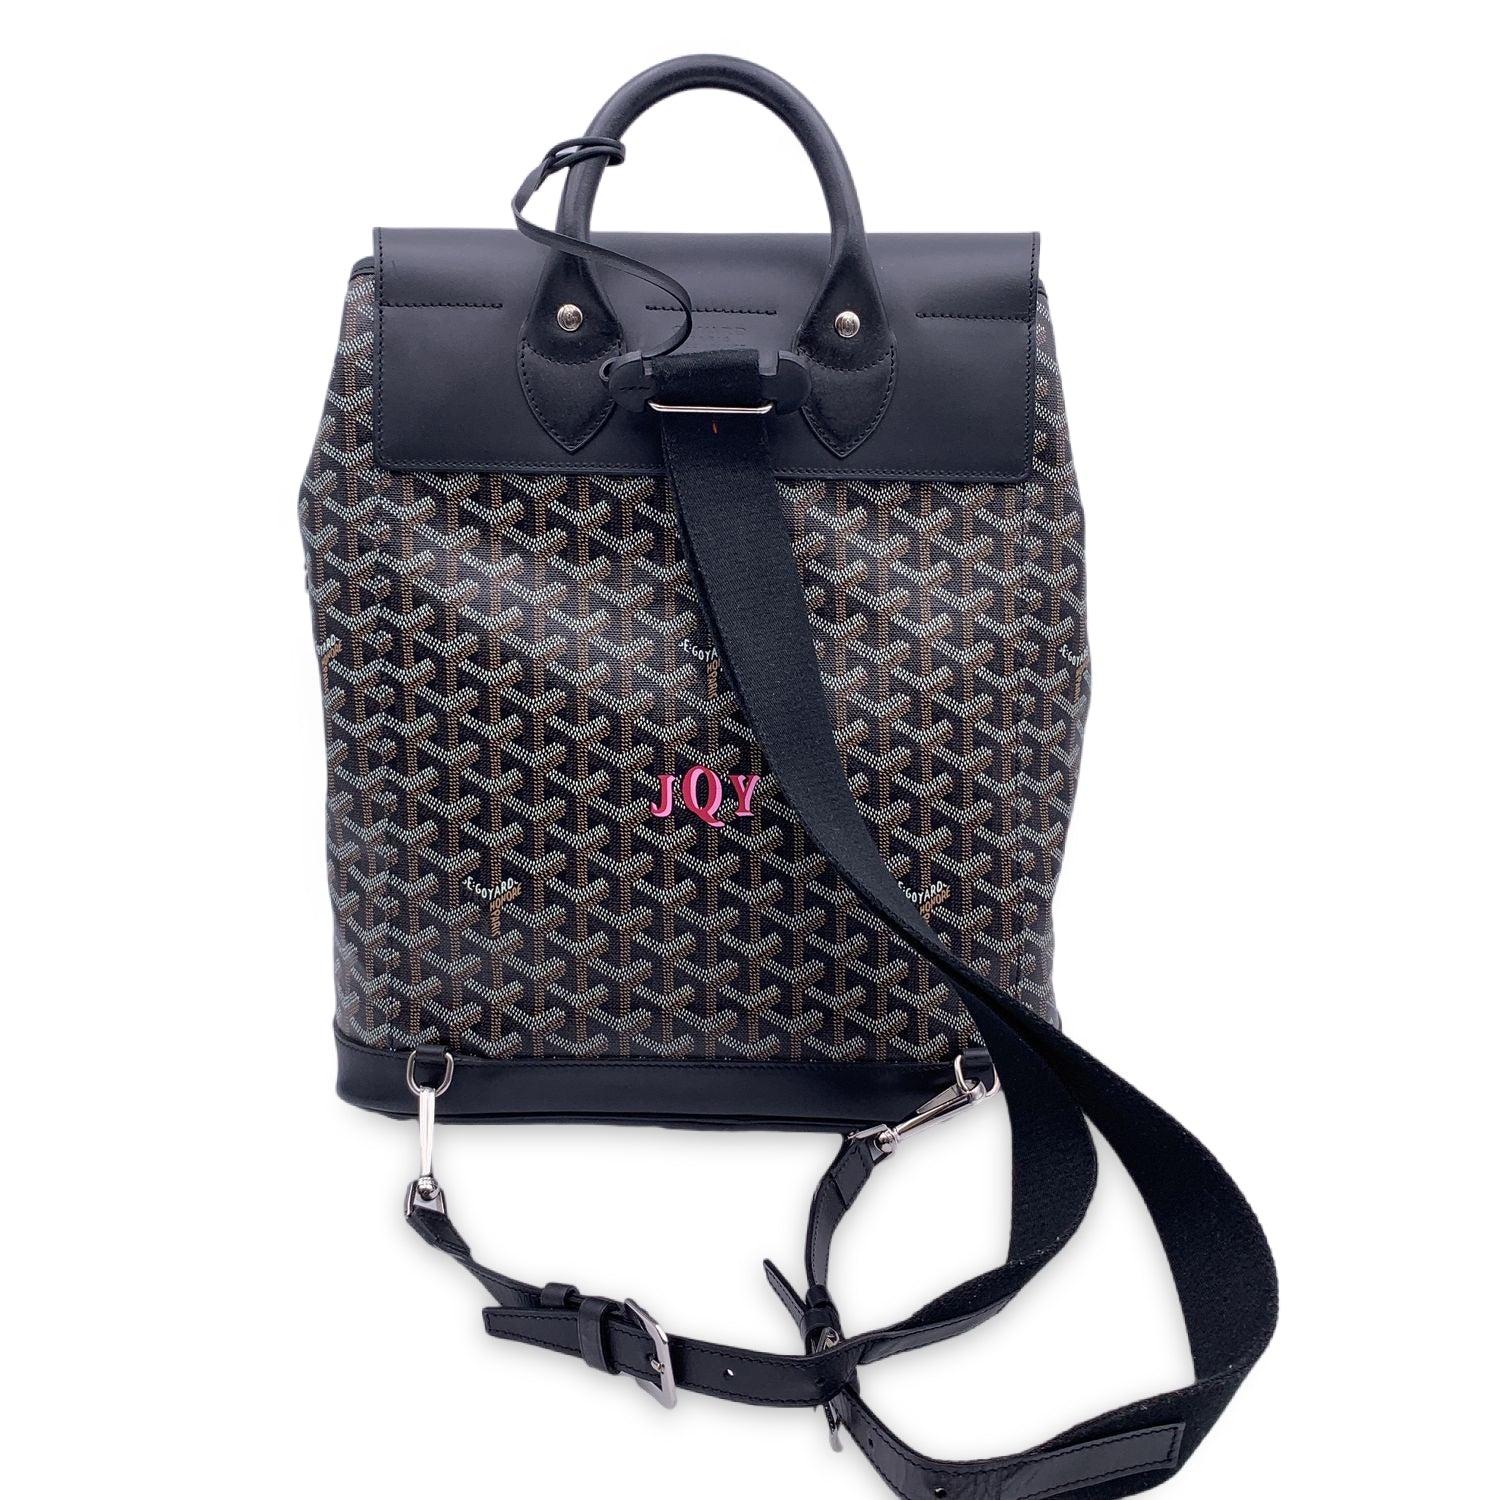 This beautiful Bag will come with a Certificate of Authenticity provided by Entrupy. The certificate will be provided at no further cost Goyard 'Alpin MM' backpack bag. The model is designed to be worn in different ways; it can be worn as a backpack